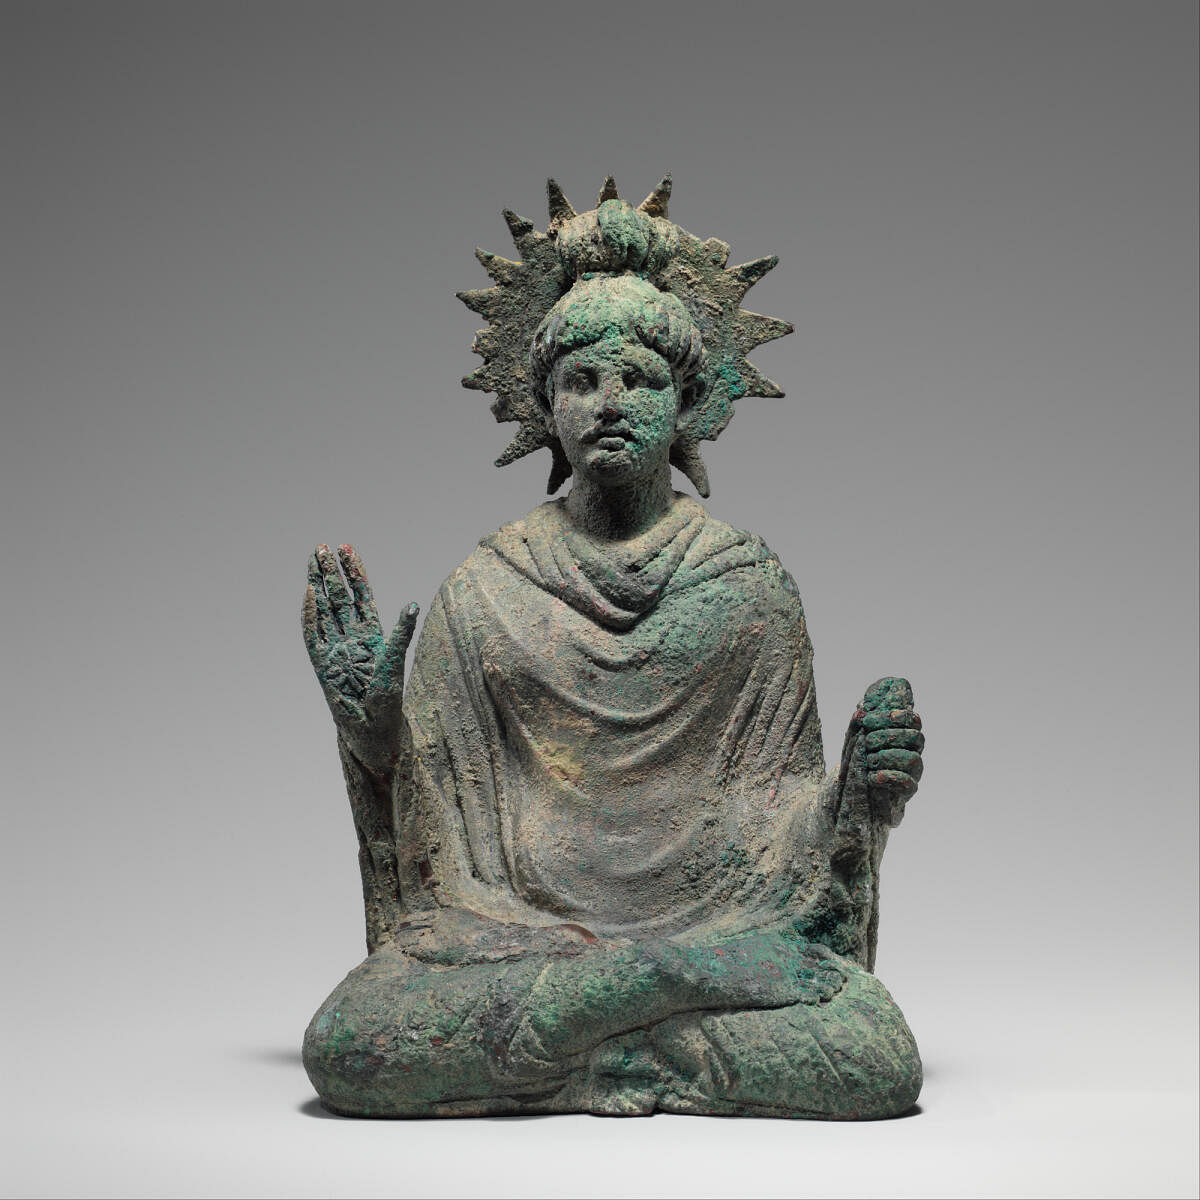 Seated Buddha, Gandhara, Pakistan (first to mid-second century). Bronze with traces of gold leaf. (Pic courtesy: MOMA)